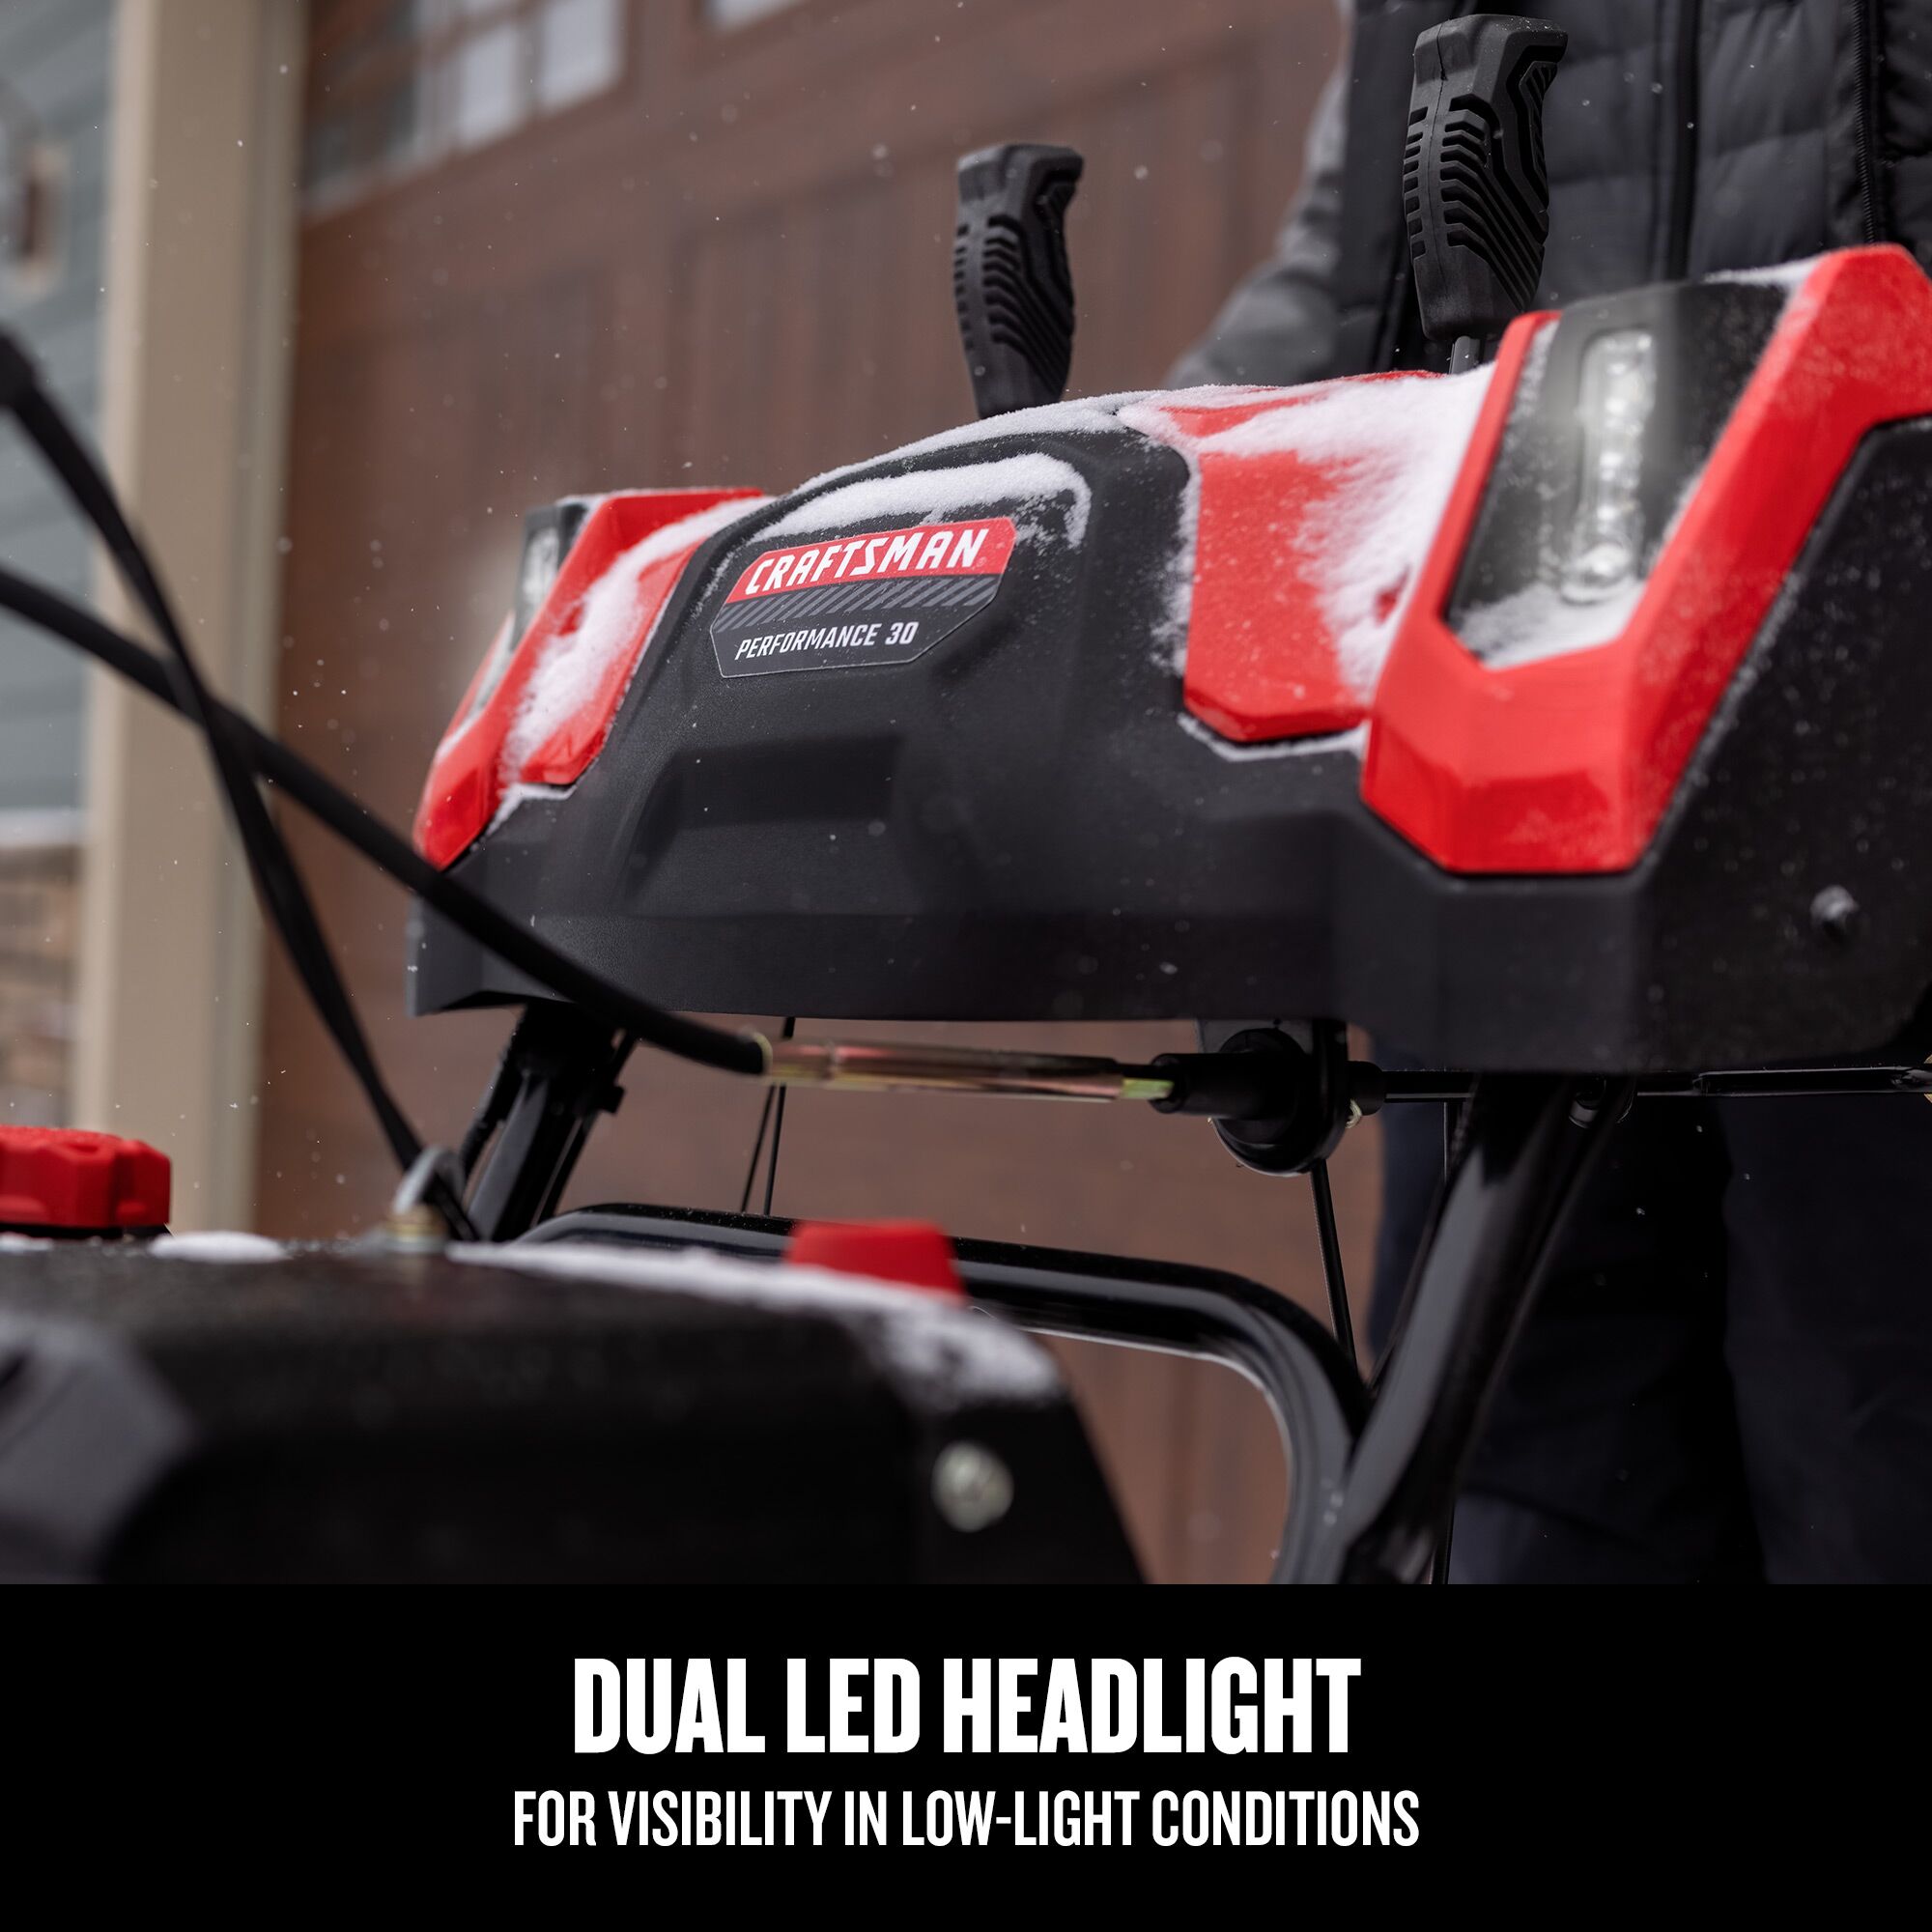 CRAFTSMAN 30-in. 357-cc Two-Stage Gas Snow Blower focused in on dual led headlight